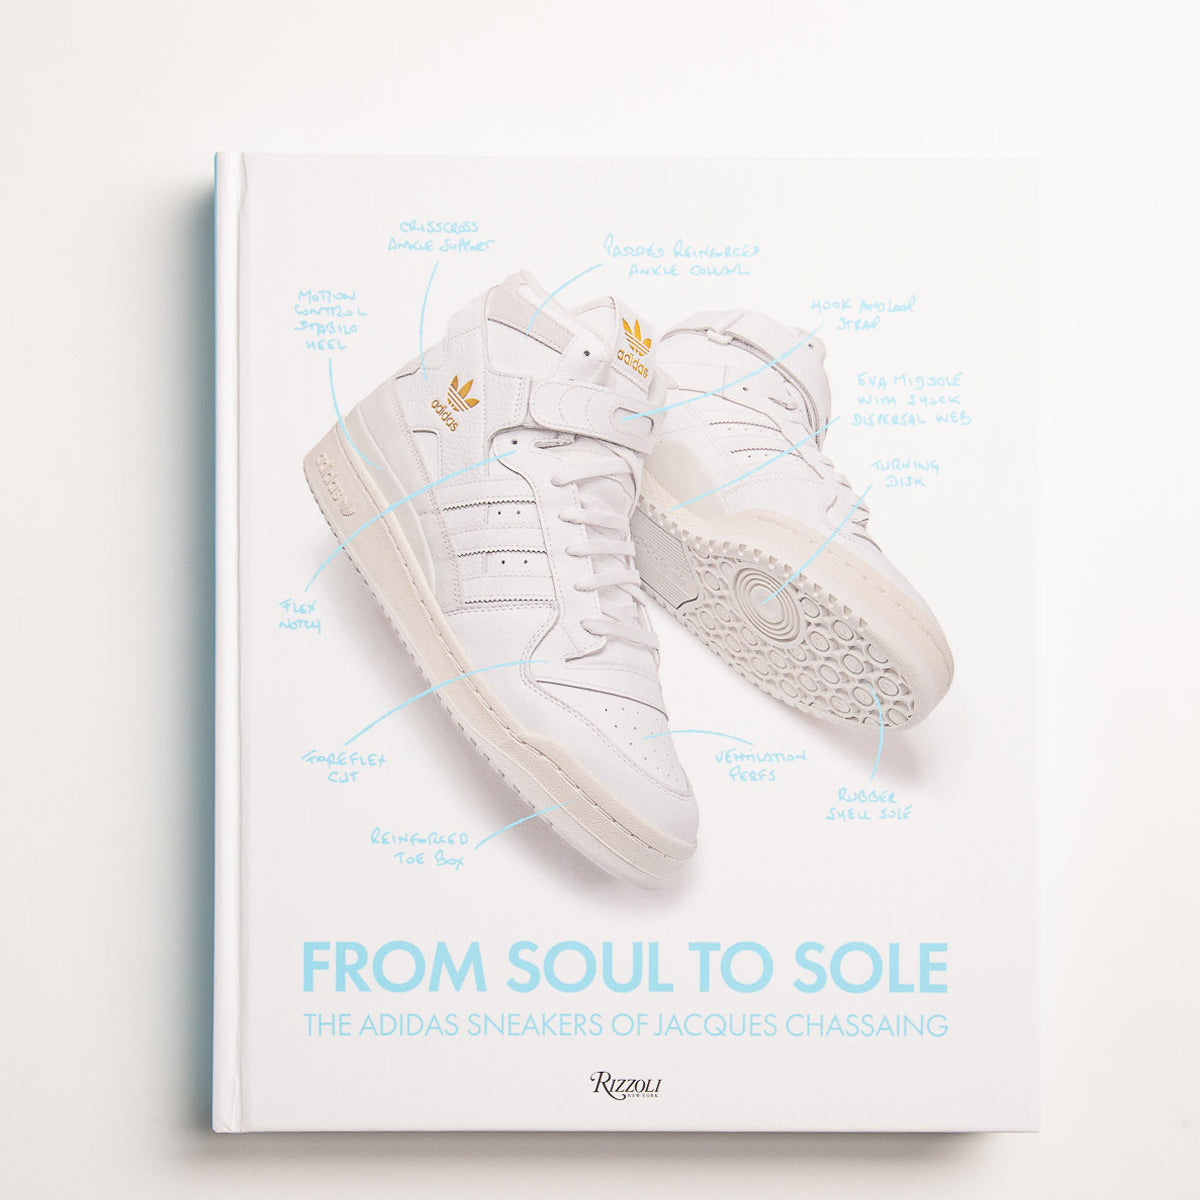 Book - From Soul to Sole, the Adidas sneakers of Jacques Chassaing